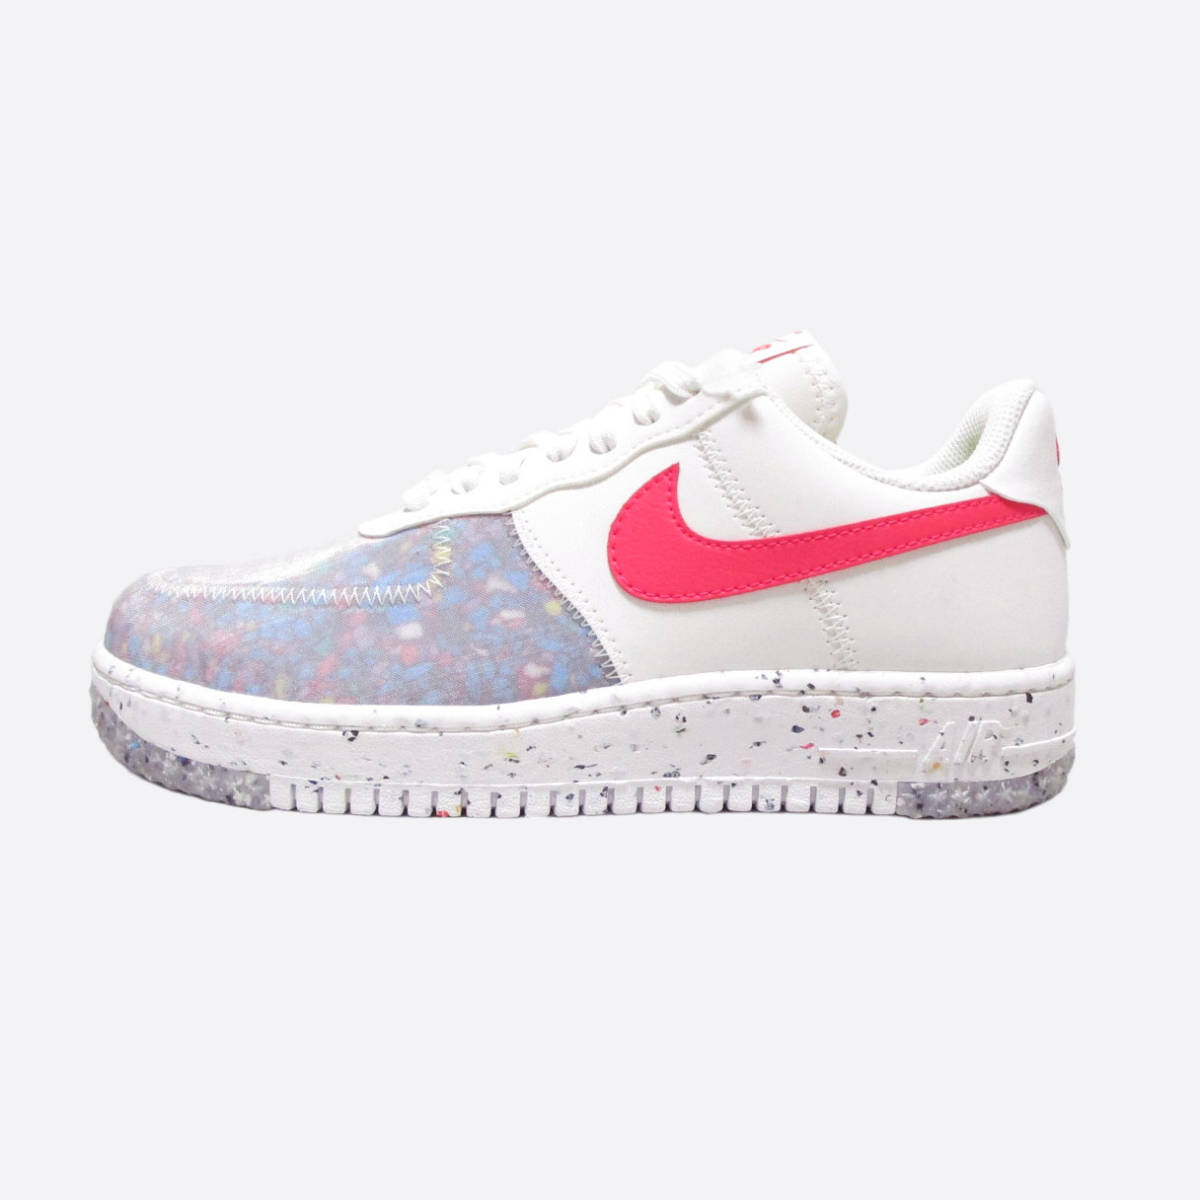 ★SALE★NIKE/ナイキ★W Air Force 1 CRATER/エアフォース１クレーター (Summit White/Siren Red/7/24cm)